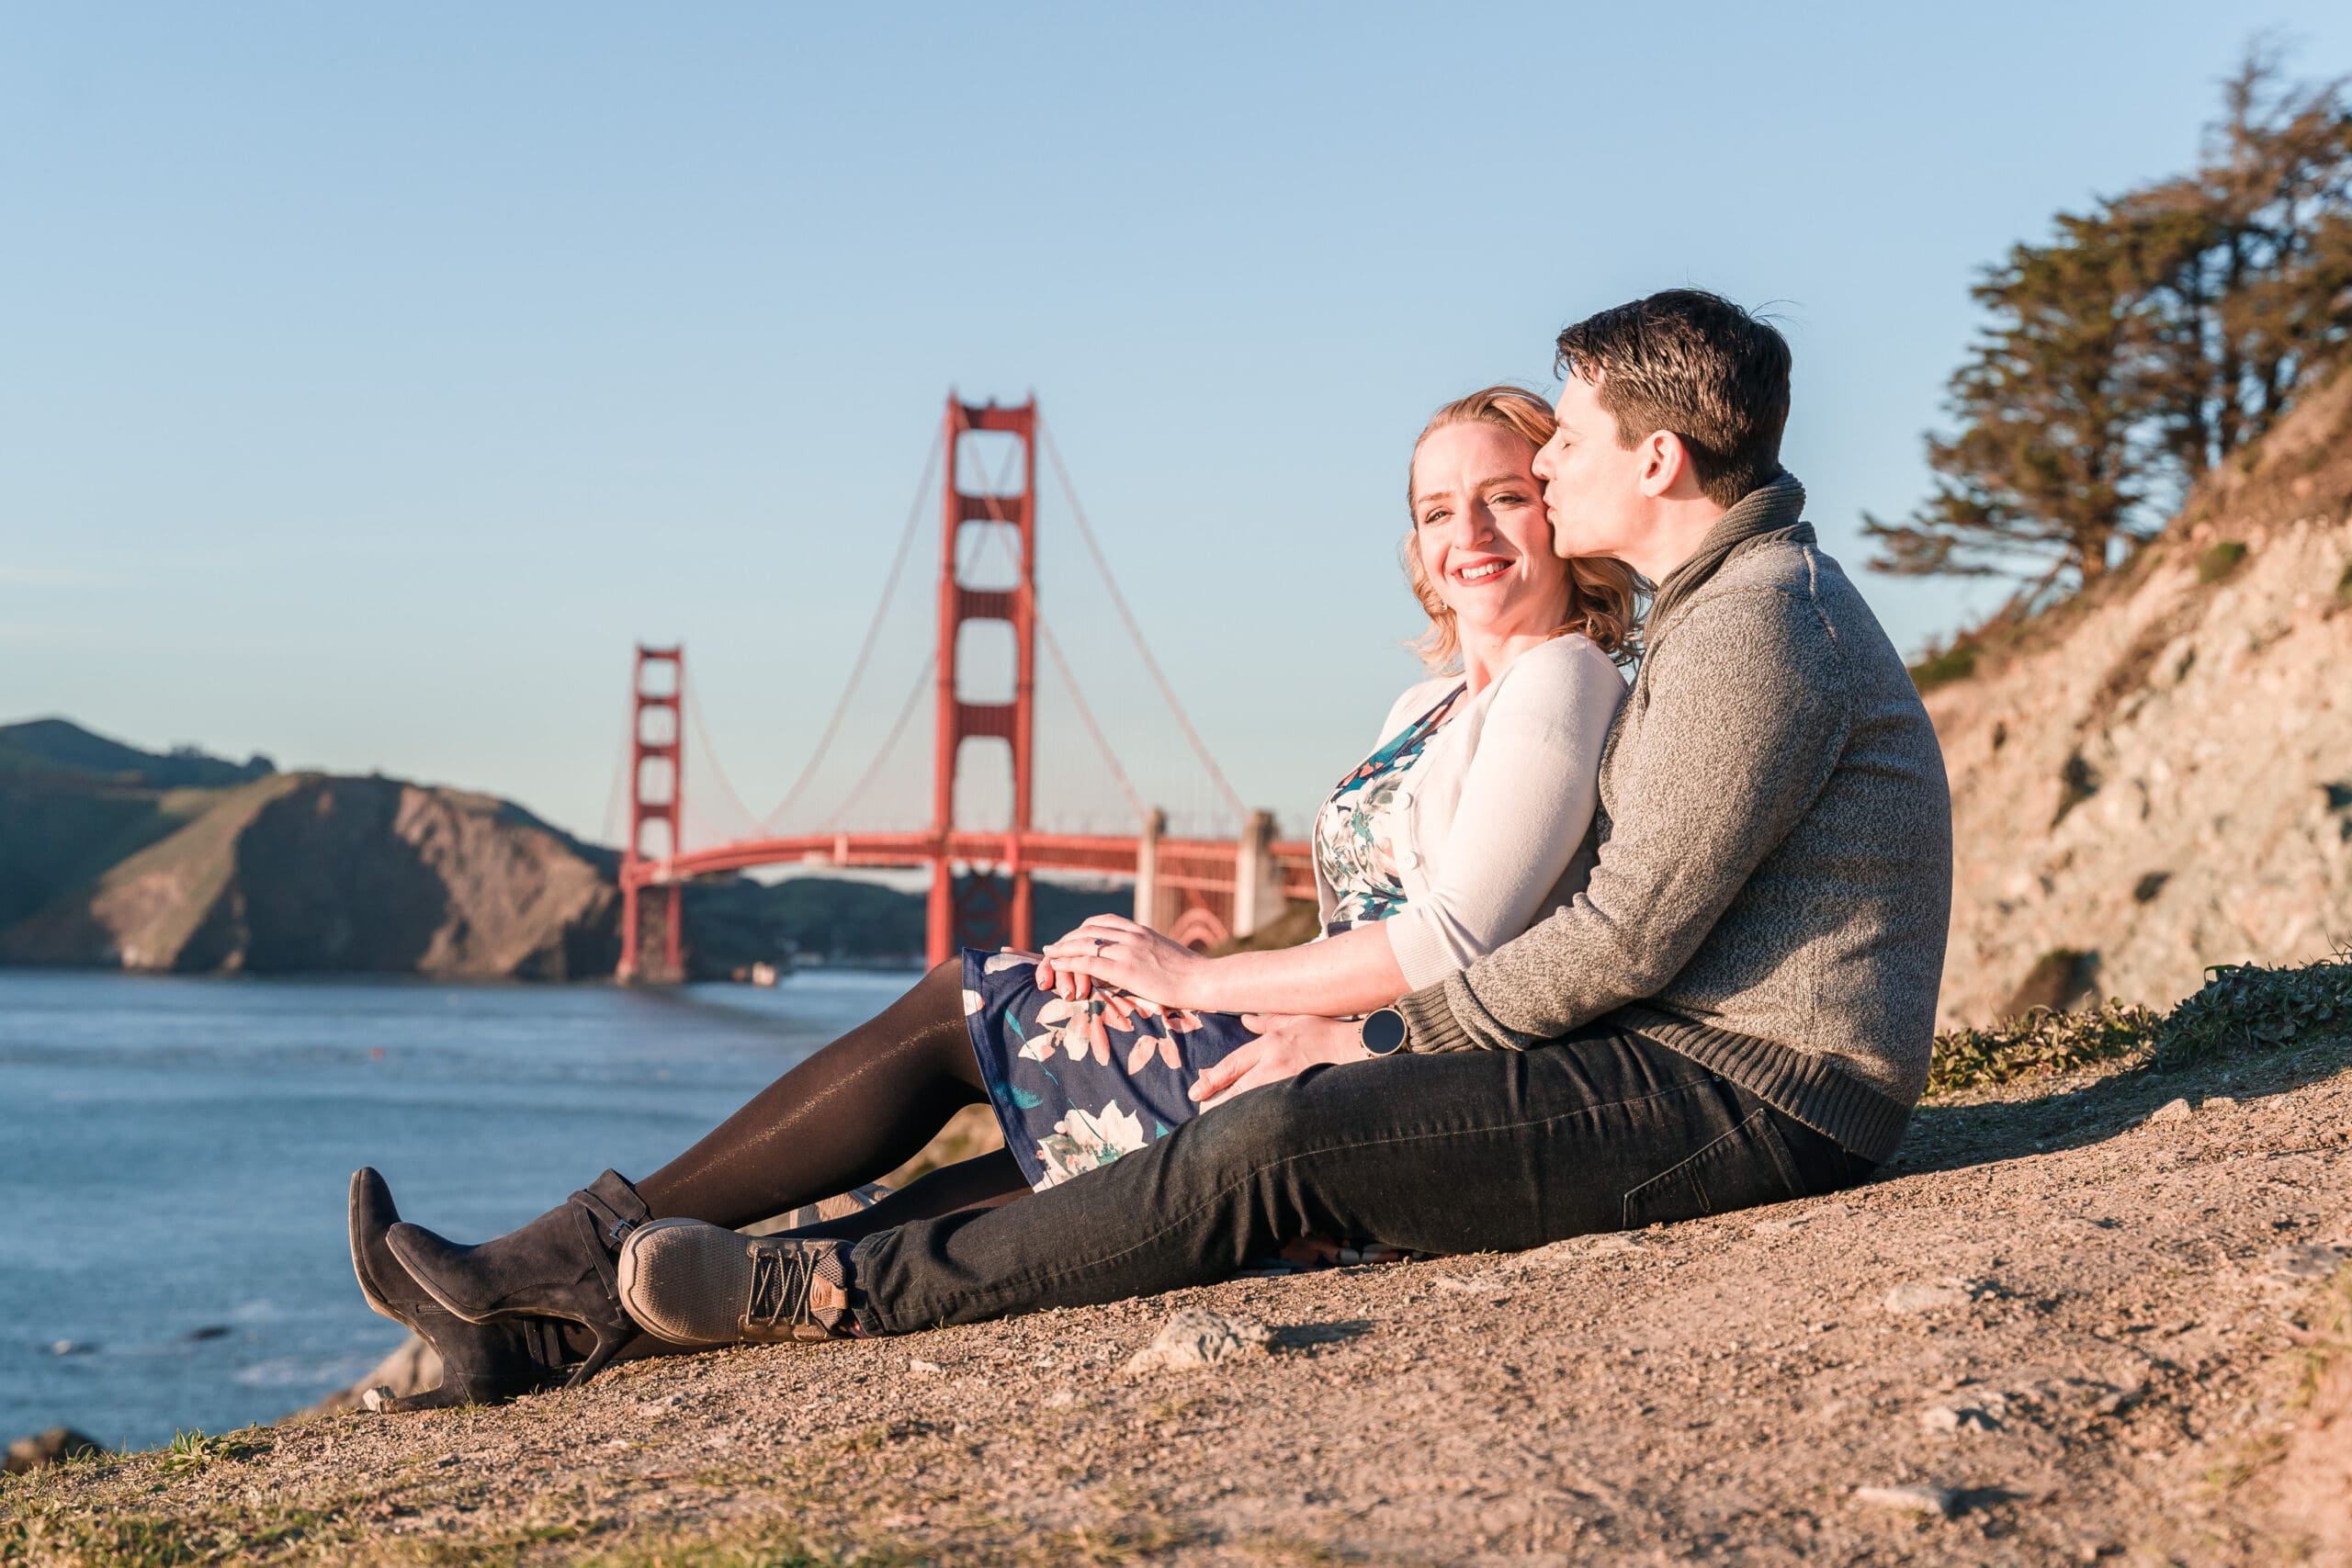 Romantic moment overlooking San Francisco: Couple shares an intimate embrace as the soon-to-be wife sits in the lap of her future husband on a cliff, with the iconic San Francisco bridge in the background.